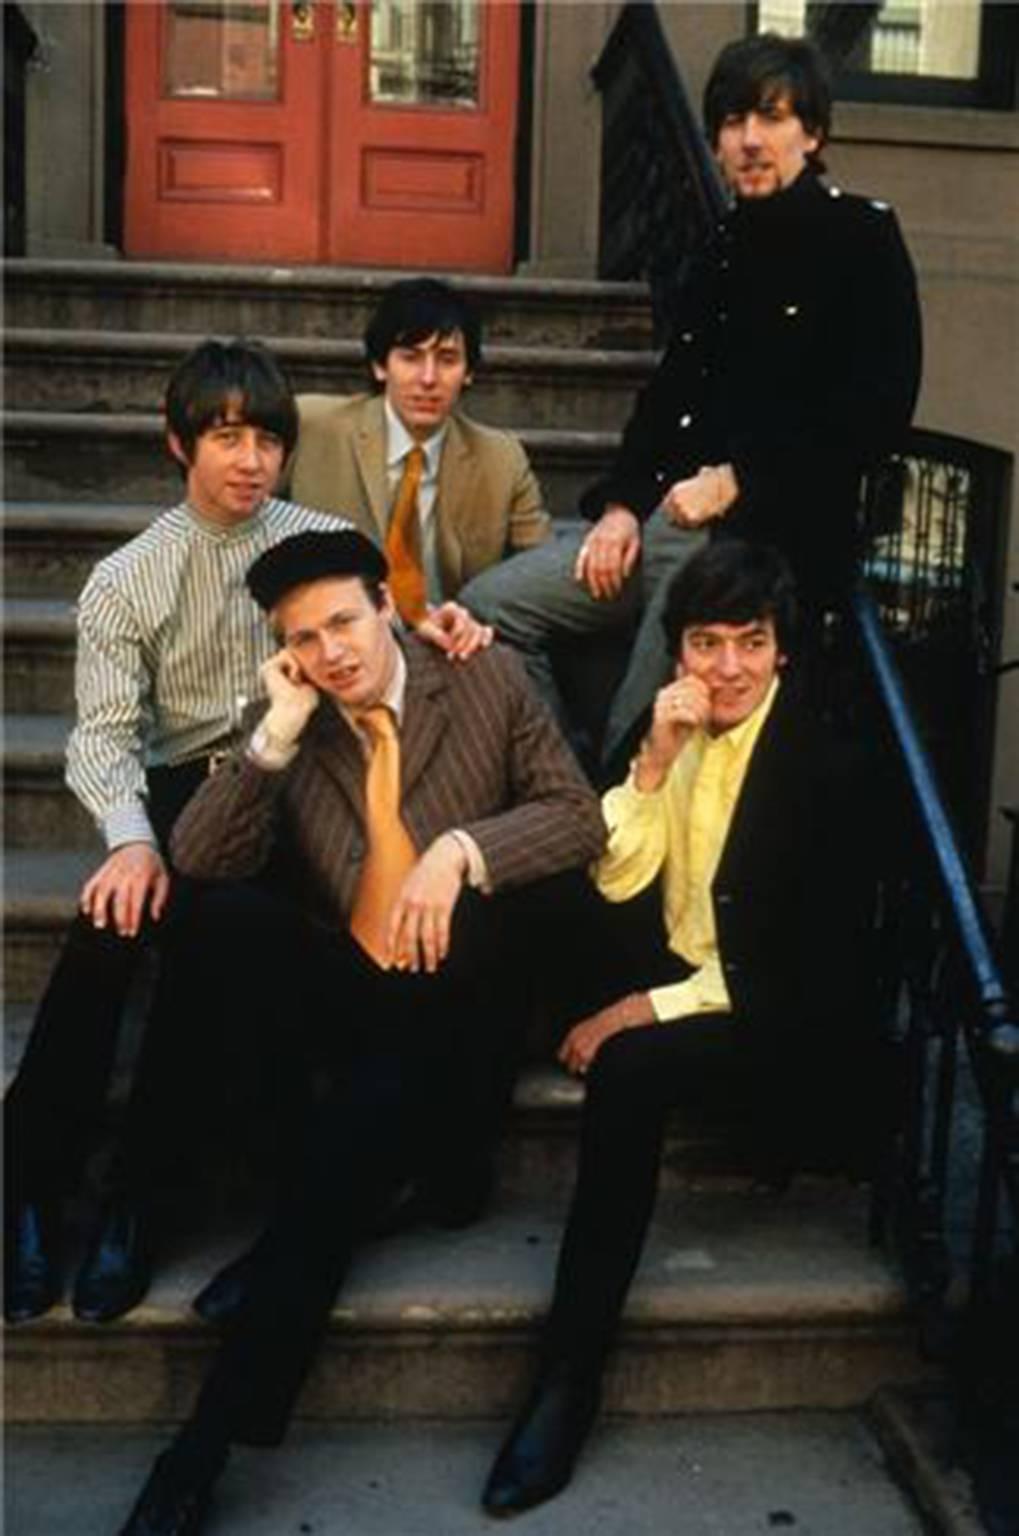 Henry Diltz Portrait Photograph - The Hollies, NYC